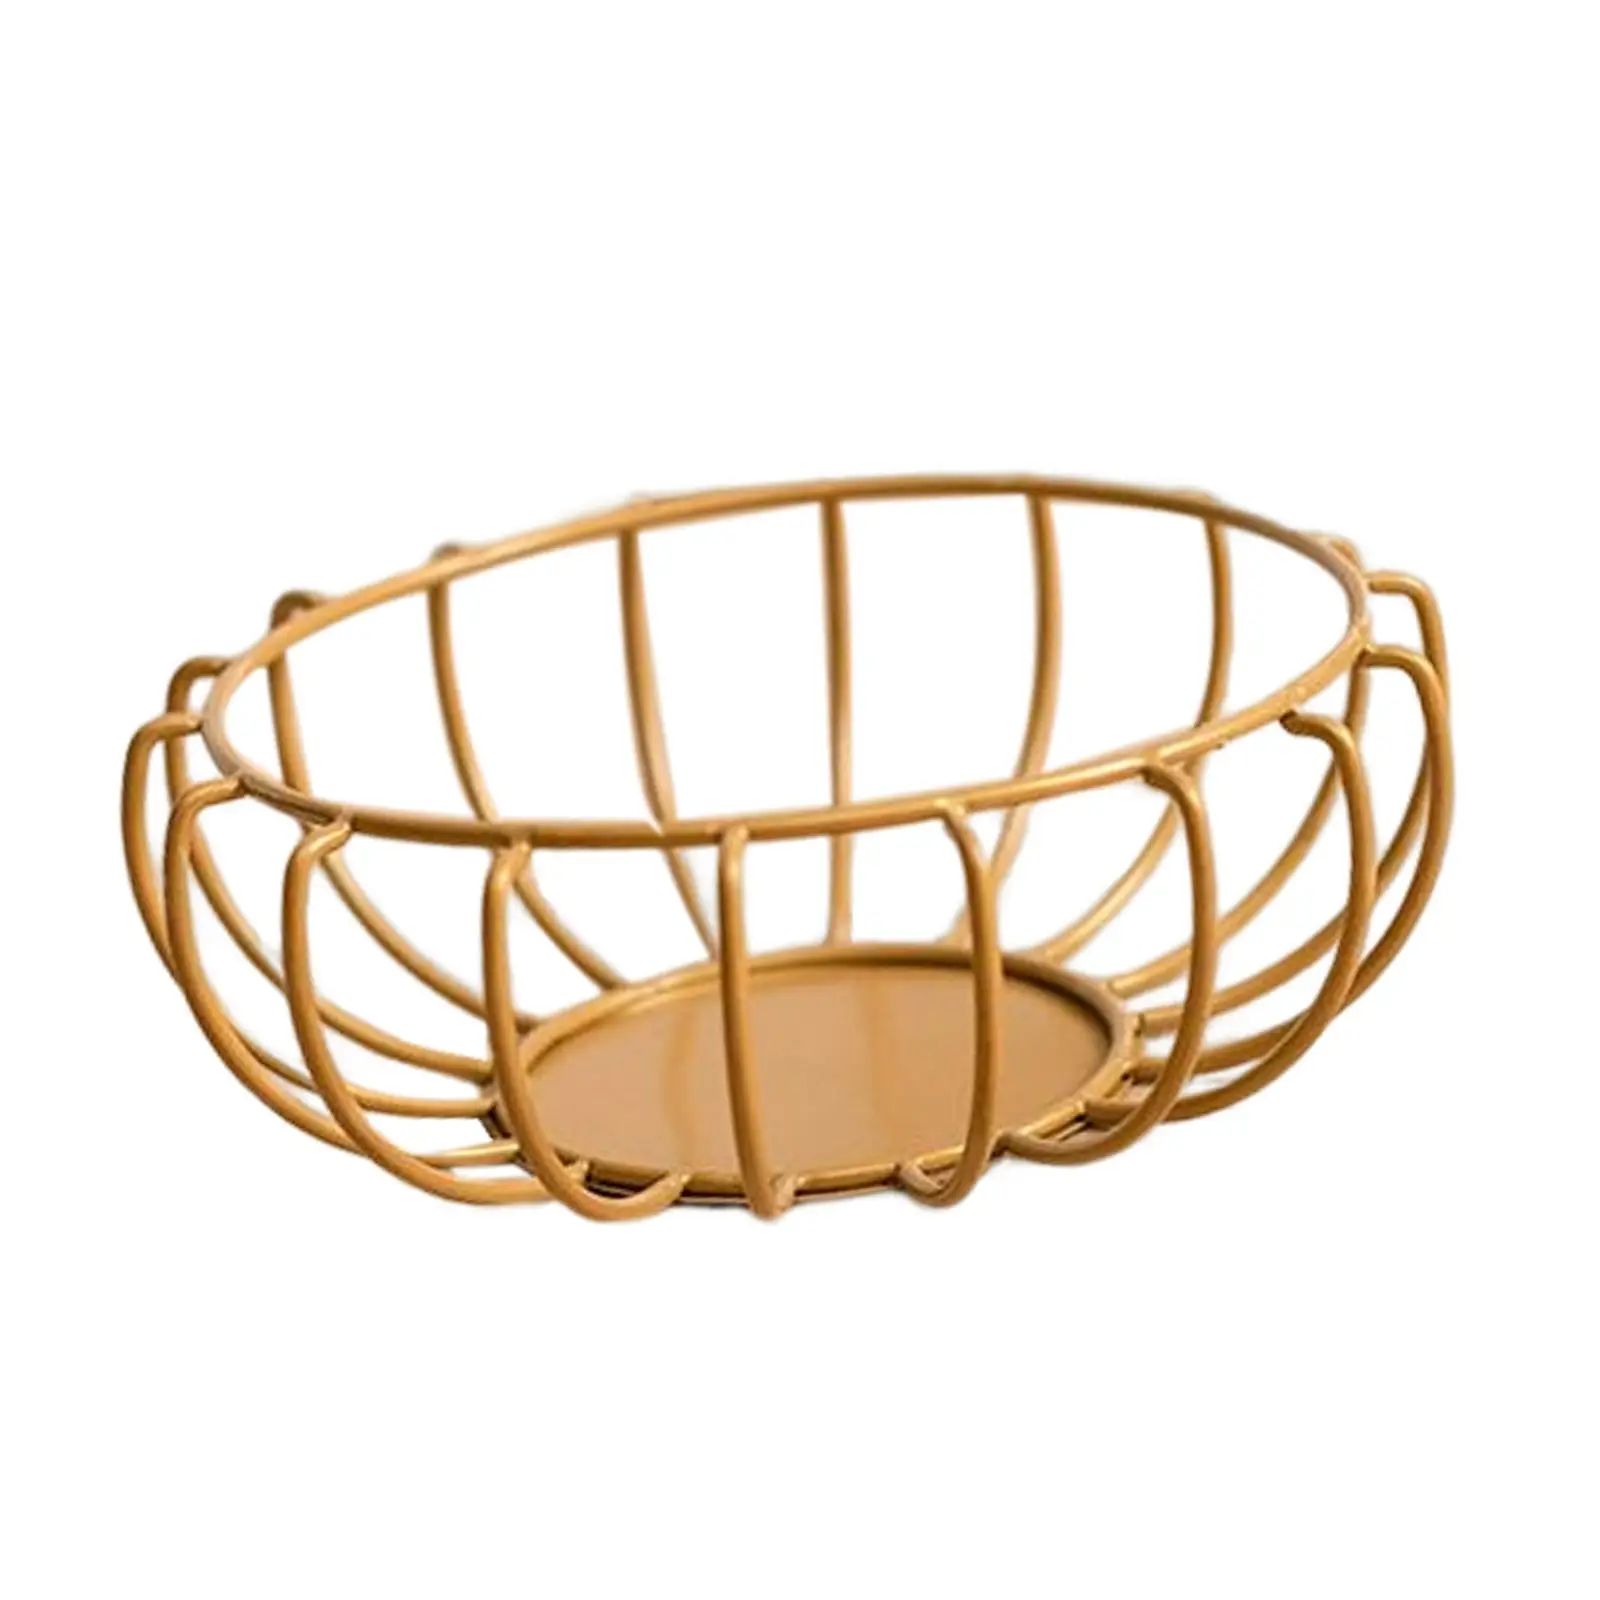 Iron Fruit Basket Bowl Serving Tray Storage Holder Durable Rustproof Decorative Modern for Onion Eggs Office Kitchen Tabletop